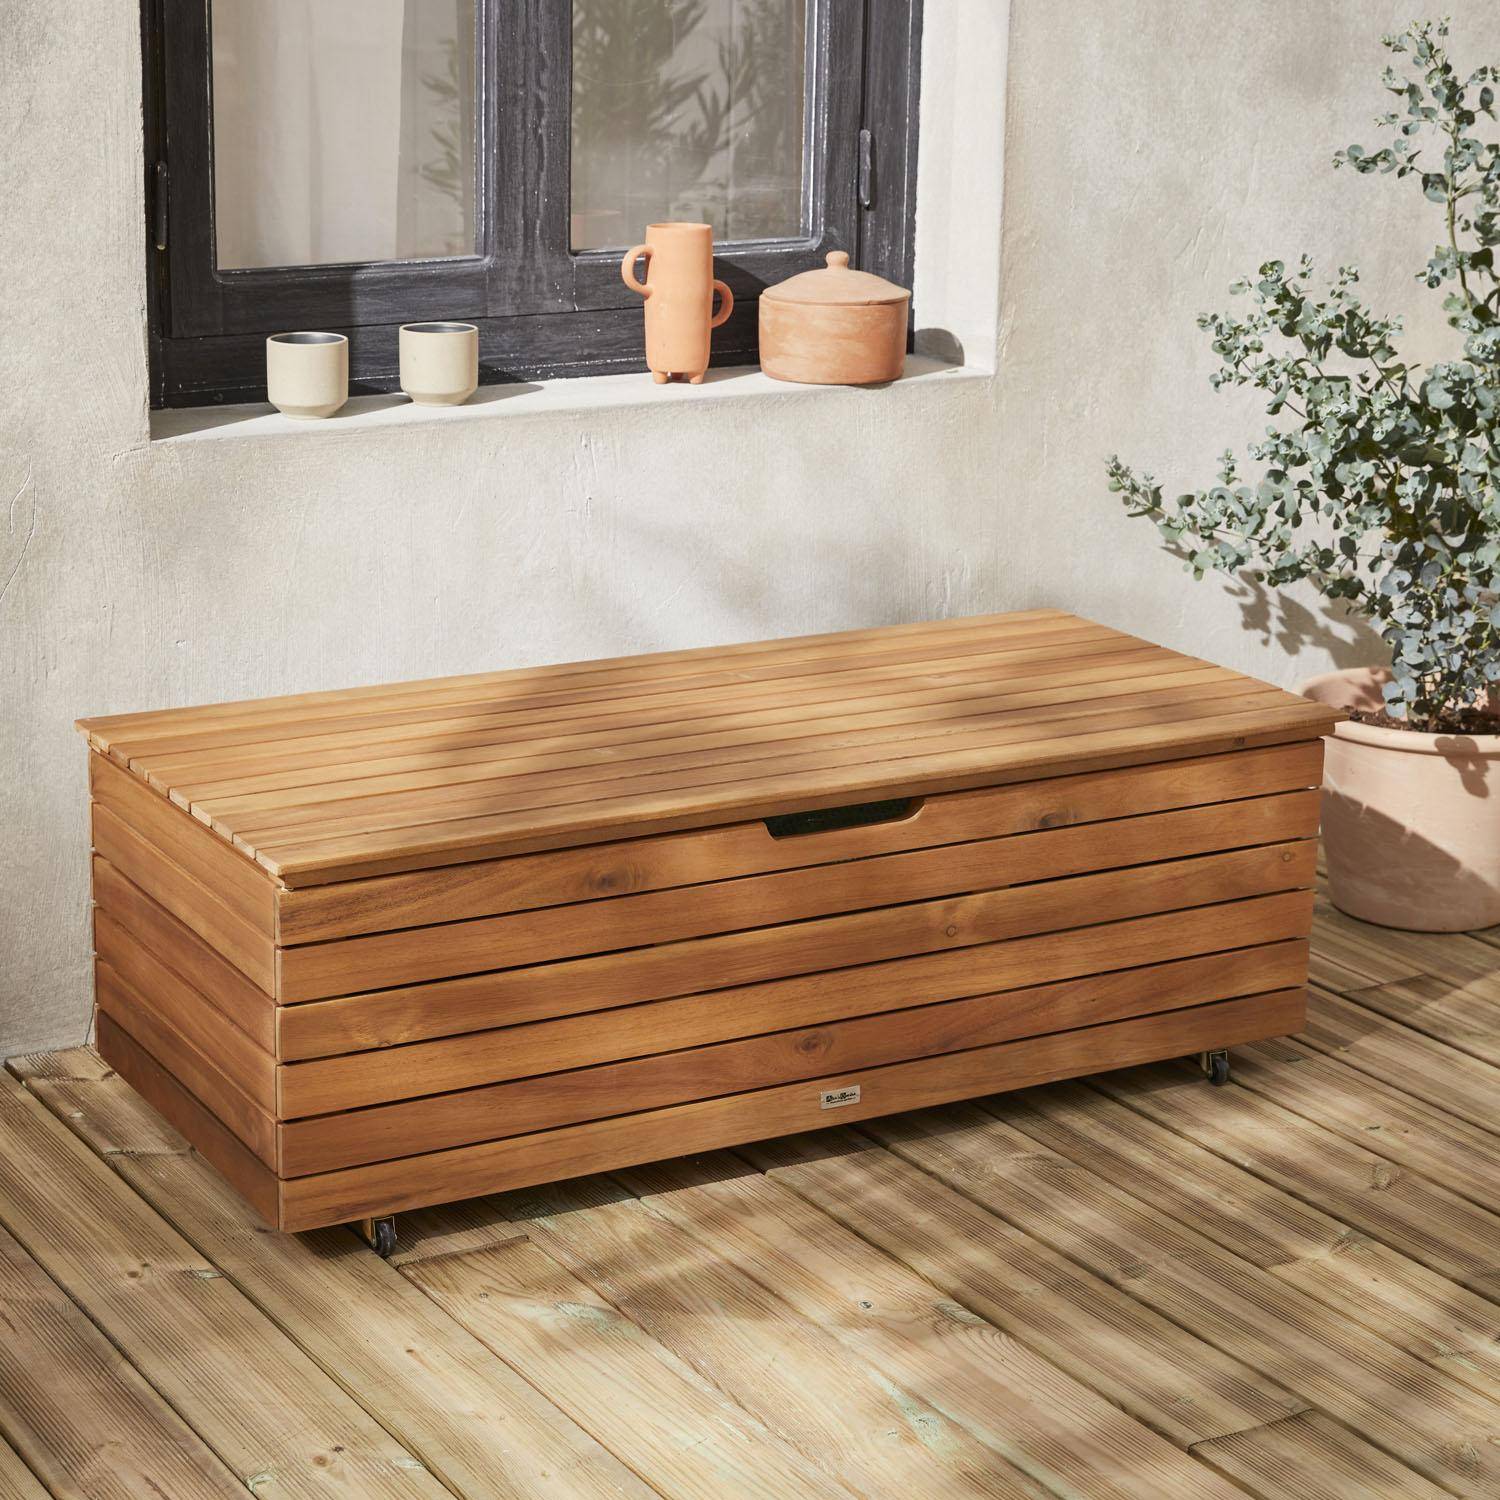 Garden storage box in wood - Saragosse - 110L, cushion storage, 107x48.5cm with hydraulic lift opening and casters Photo1